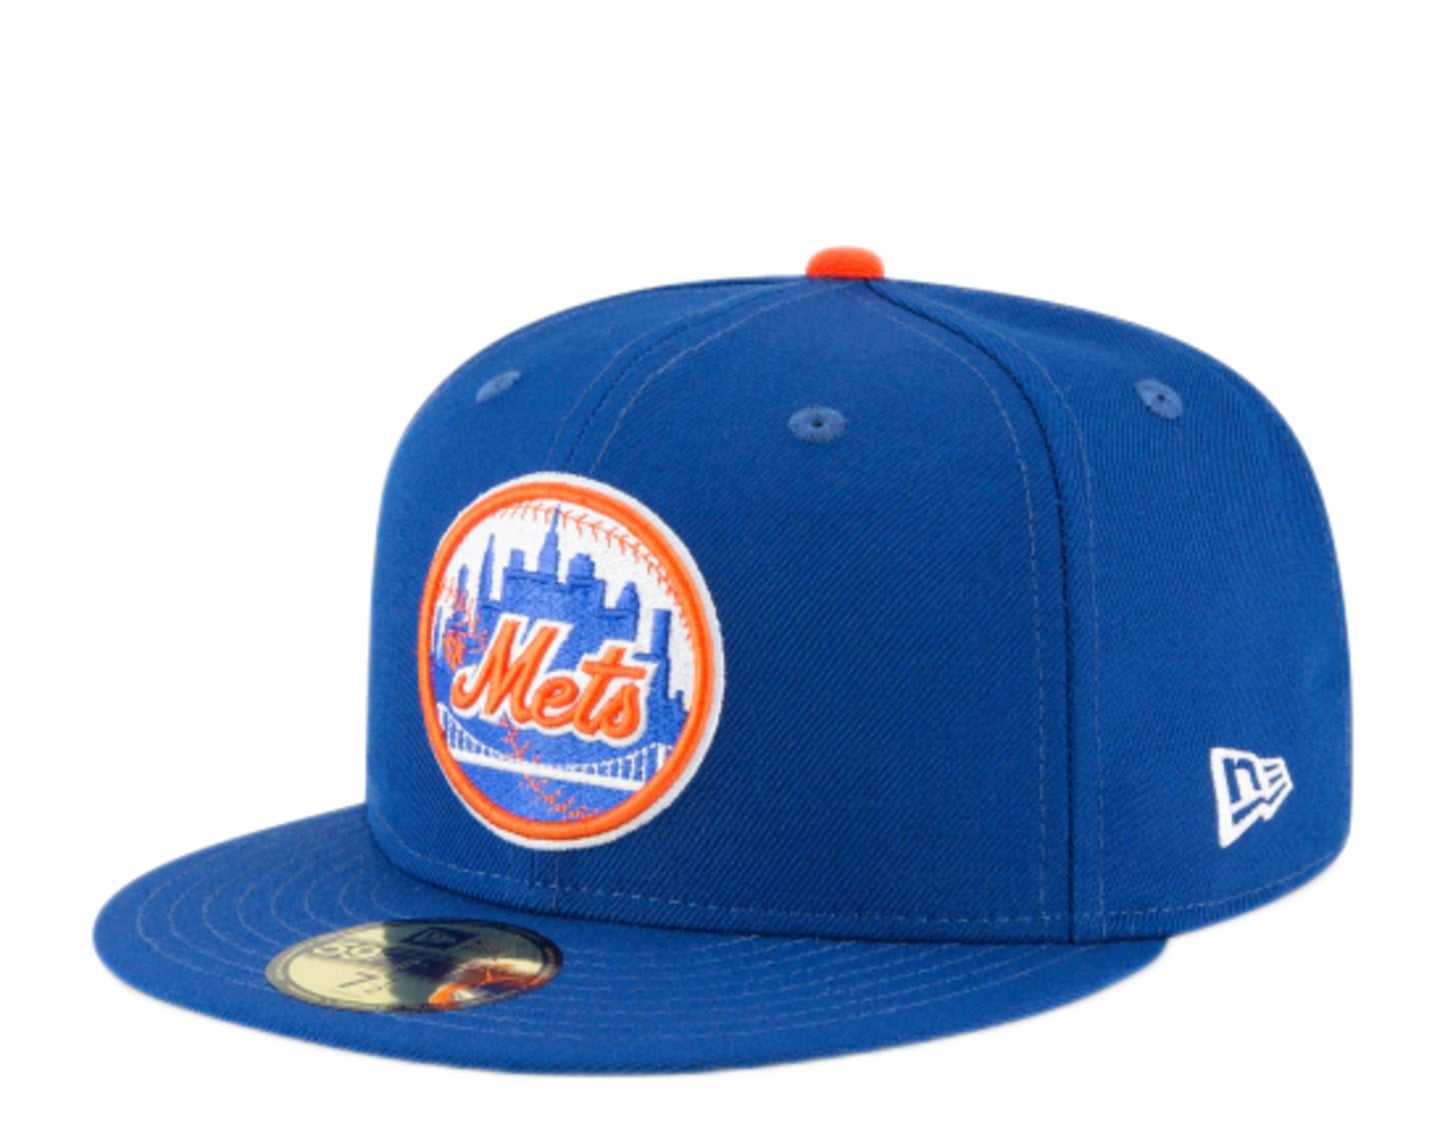 New Era 59Fifty MLB New York Mets 1962 Cooperstown Blue Fitted Hat 11590965